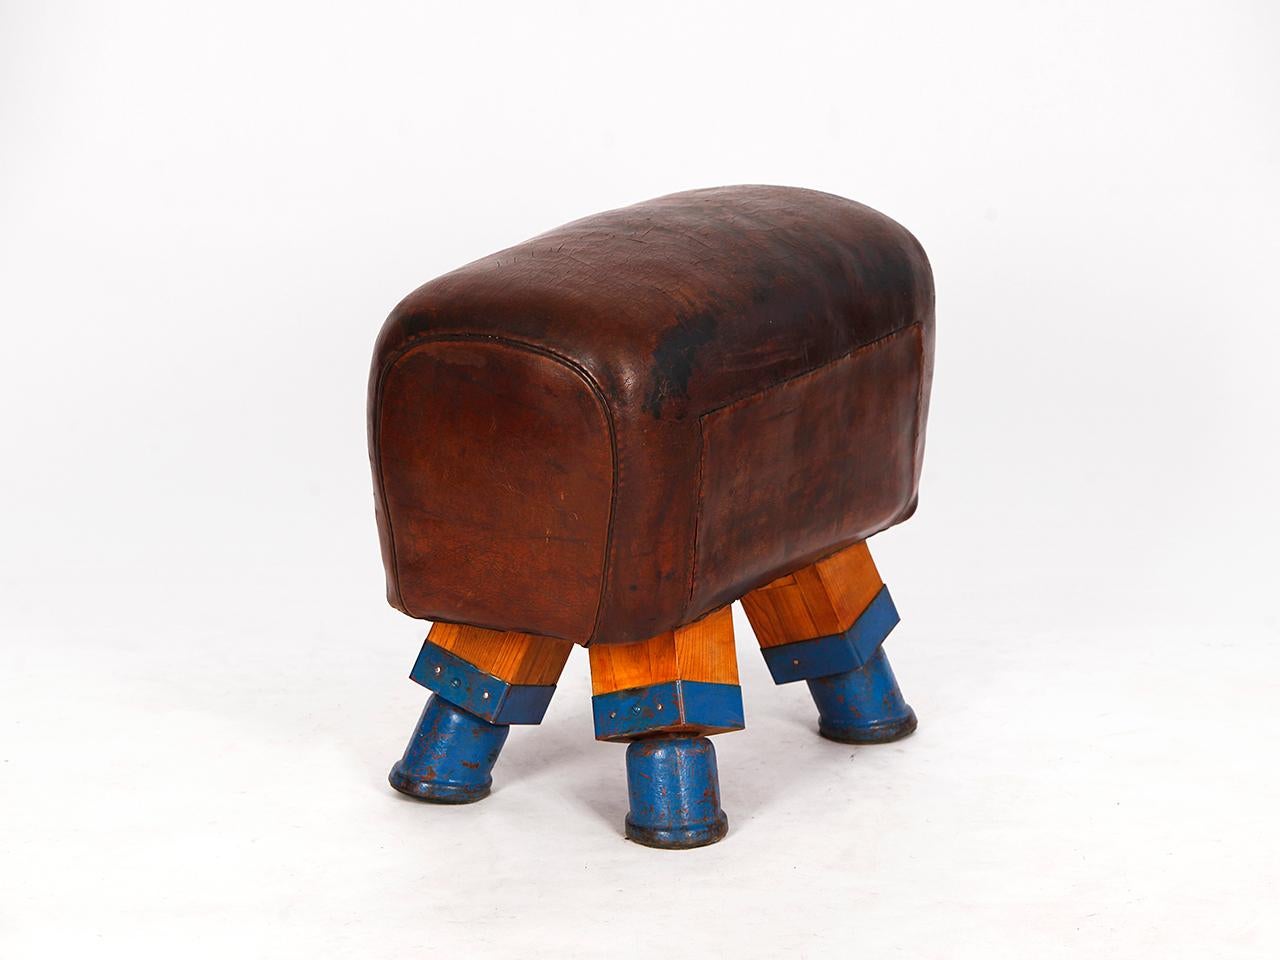 Hand-Crafted Gymnastic Vintage Czech Leather Gym Stool Bench Pommel Horse, 1930s For Sale